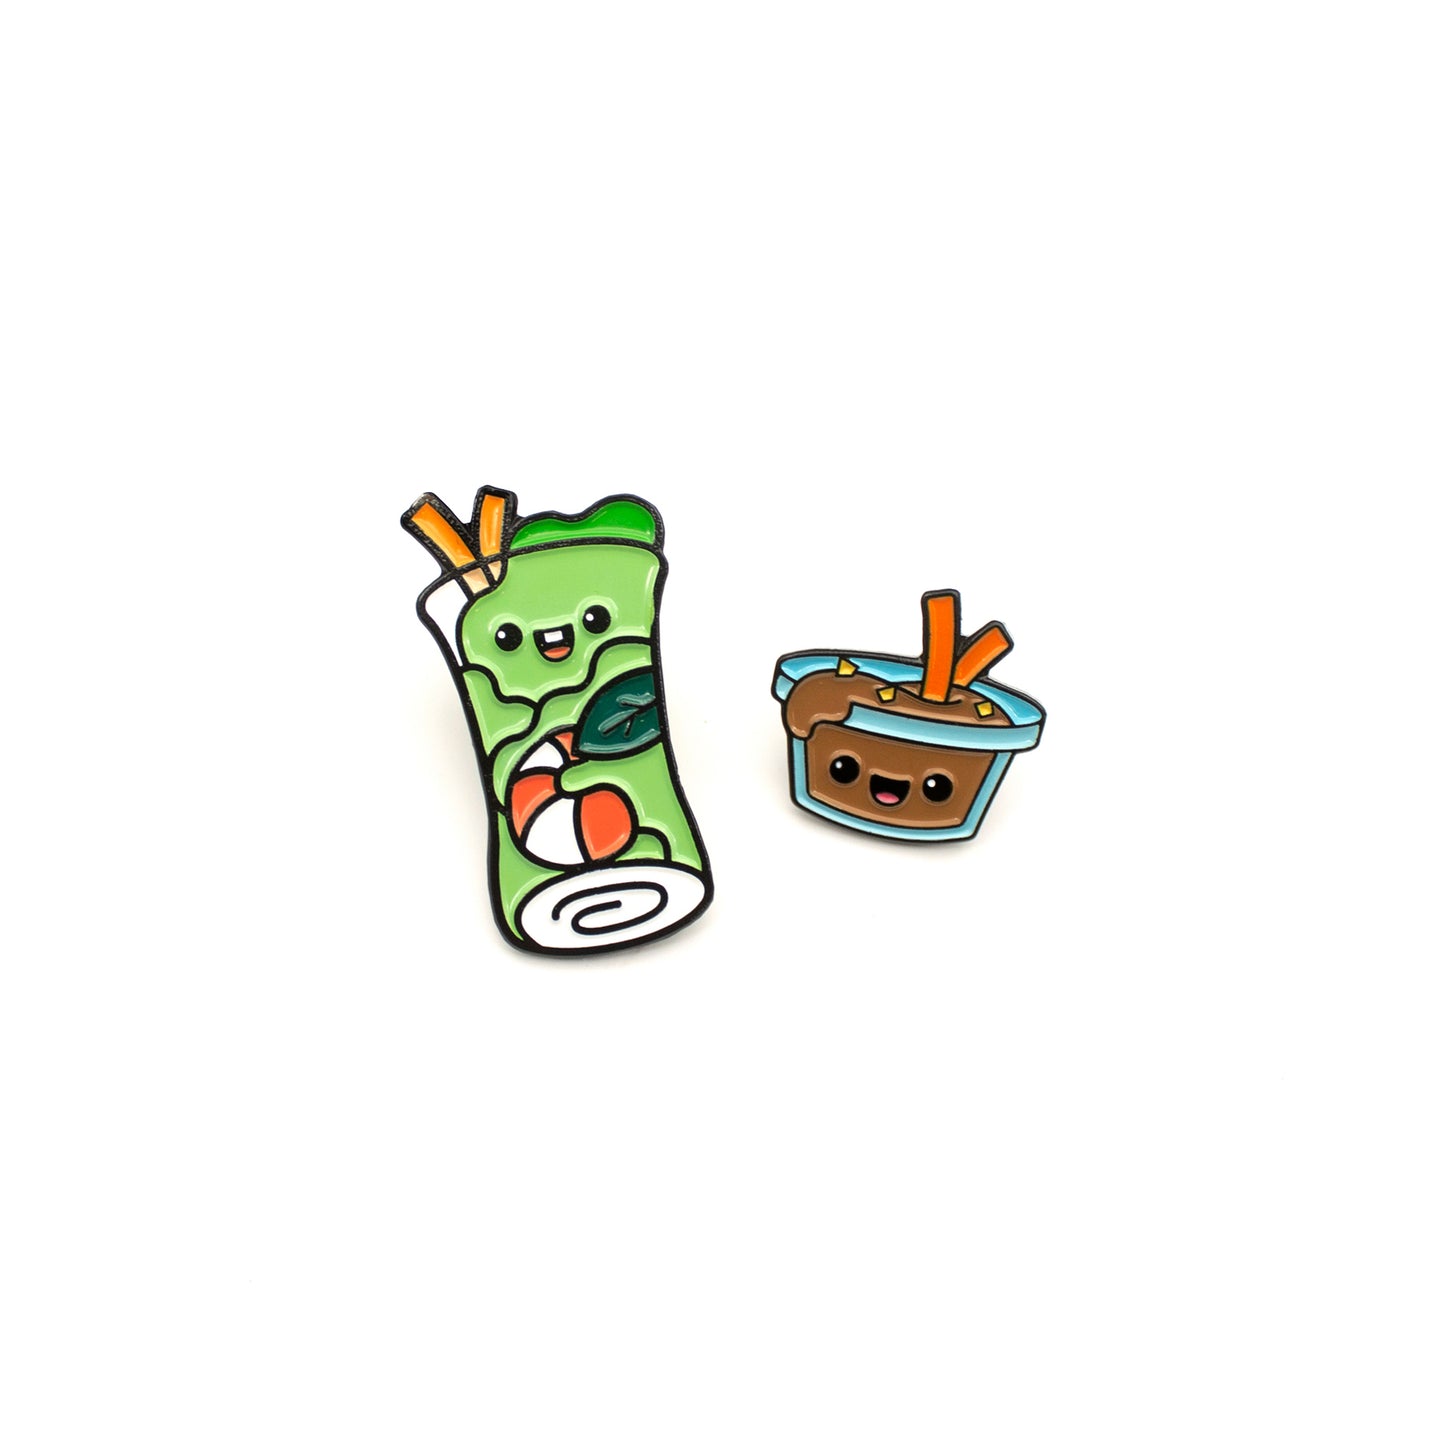 Spring Roll and Peanut Sauce enamel pins on white background